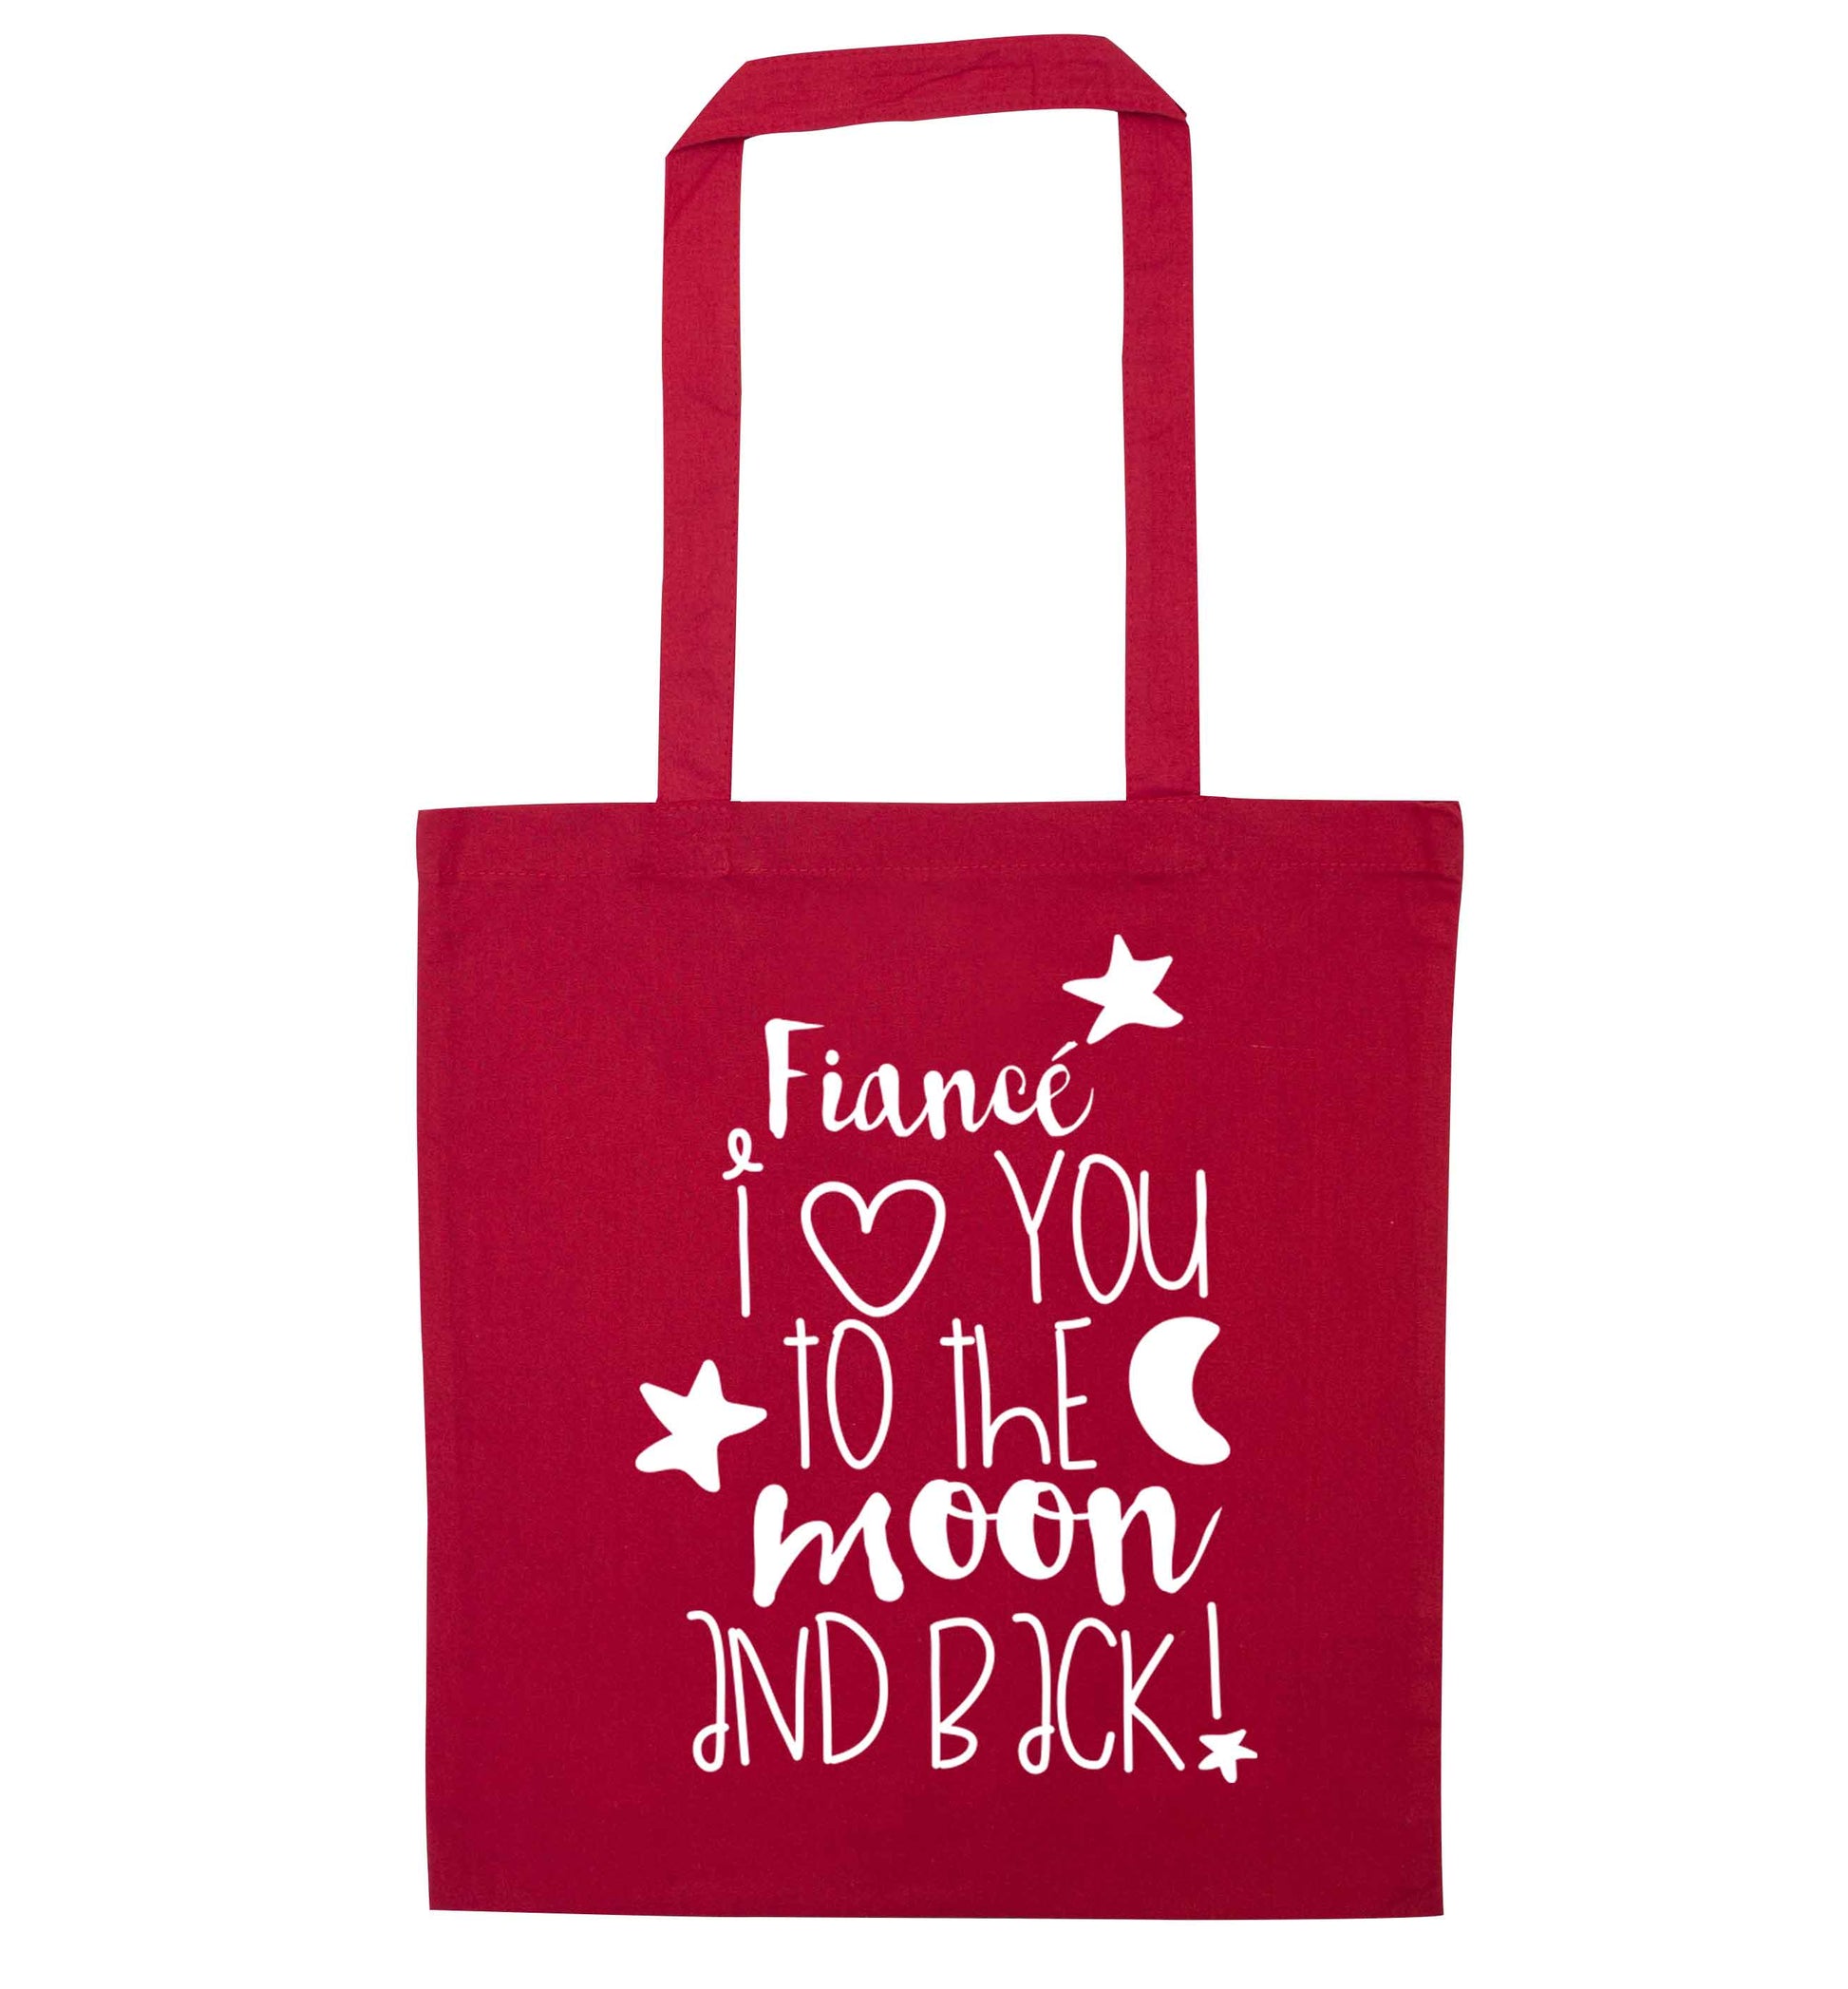 Fiancé I love you to the moon and back red tote bag